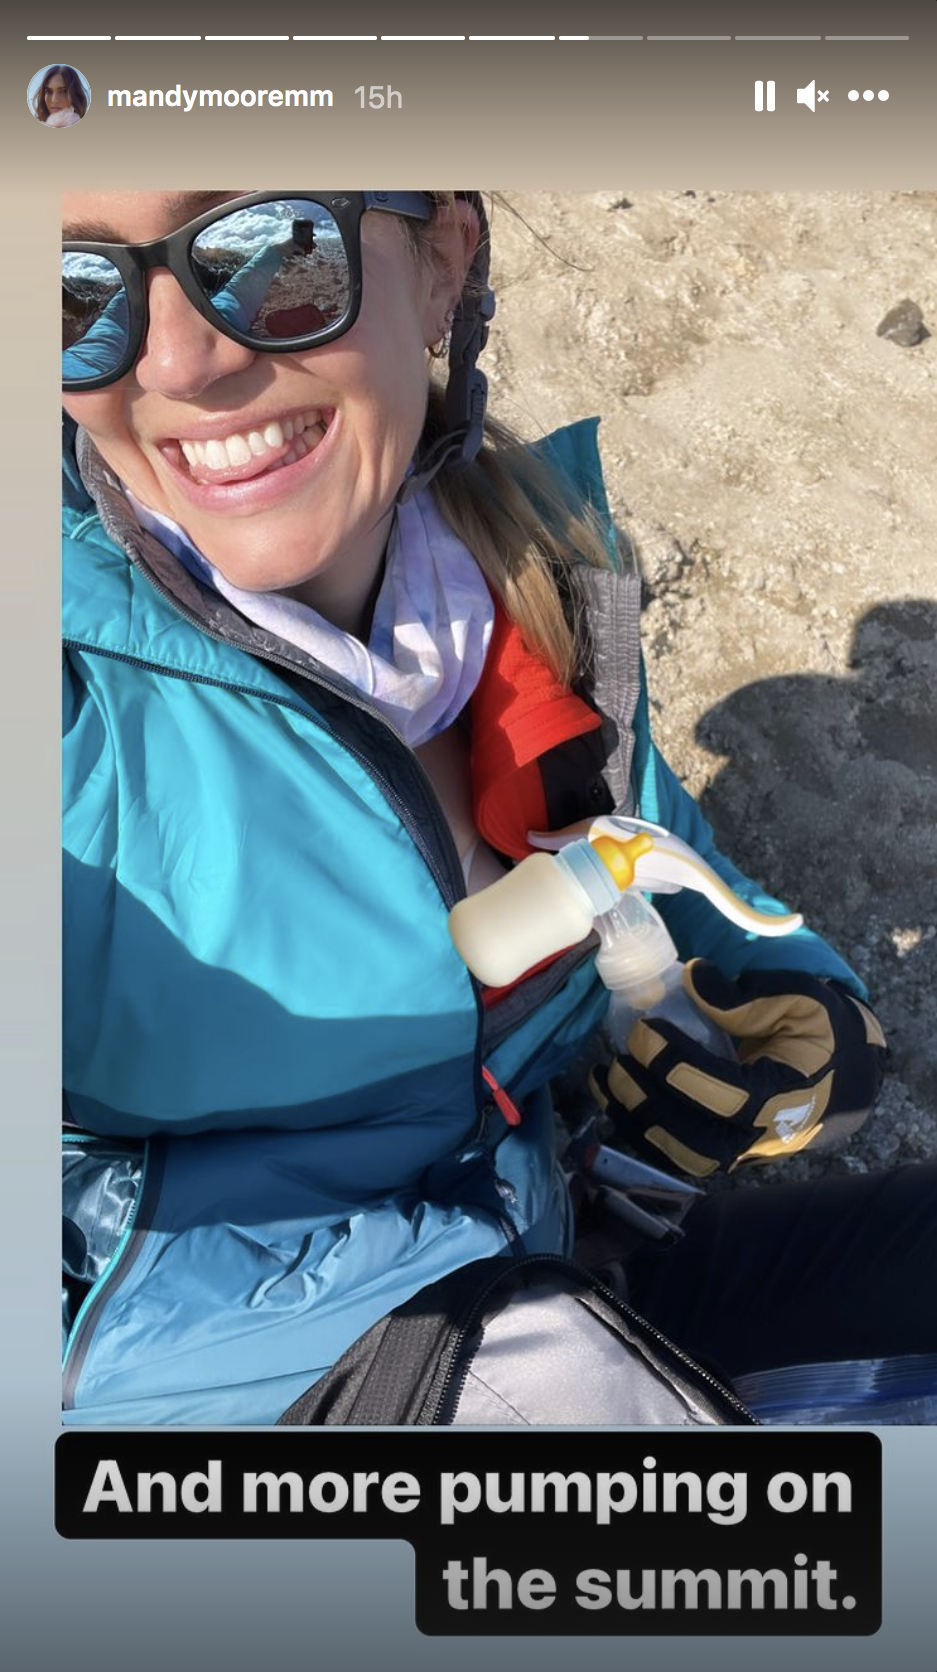 Mandy Moore smiles while pumping breastmilk and taking a selfie from the summit of Mount Baker